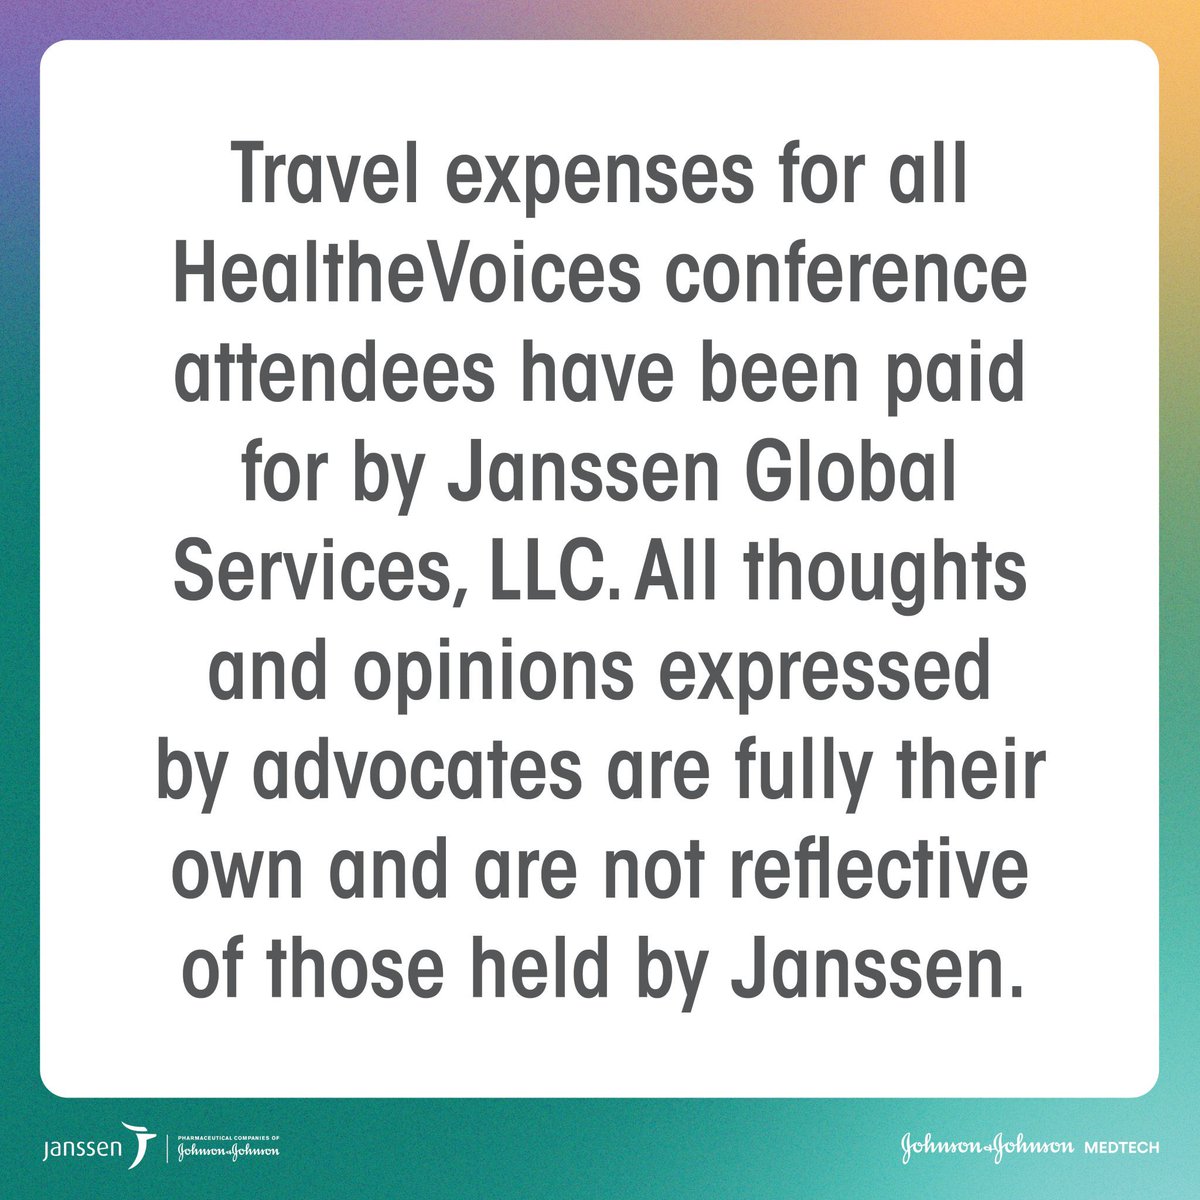 My travel and expenses have been covered by Janssen. #HealtheVoices22